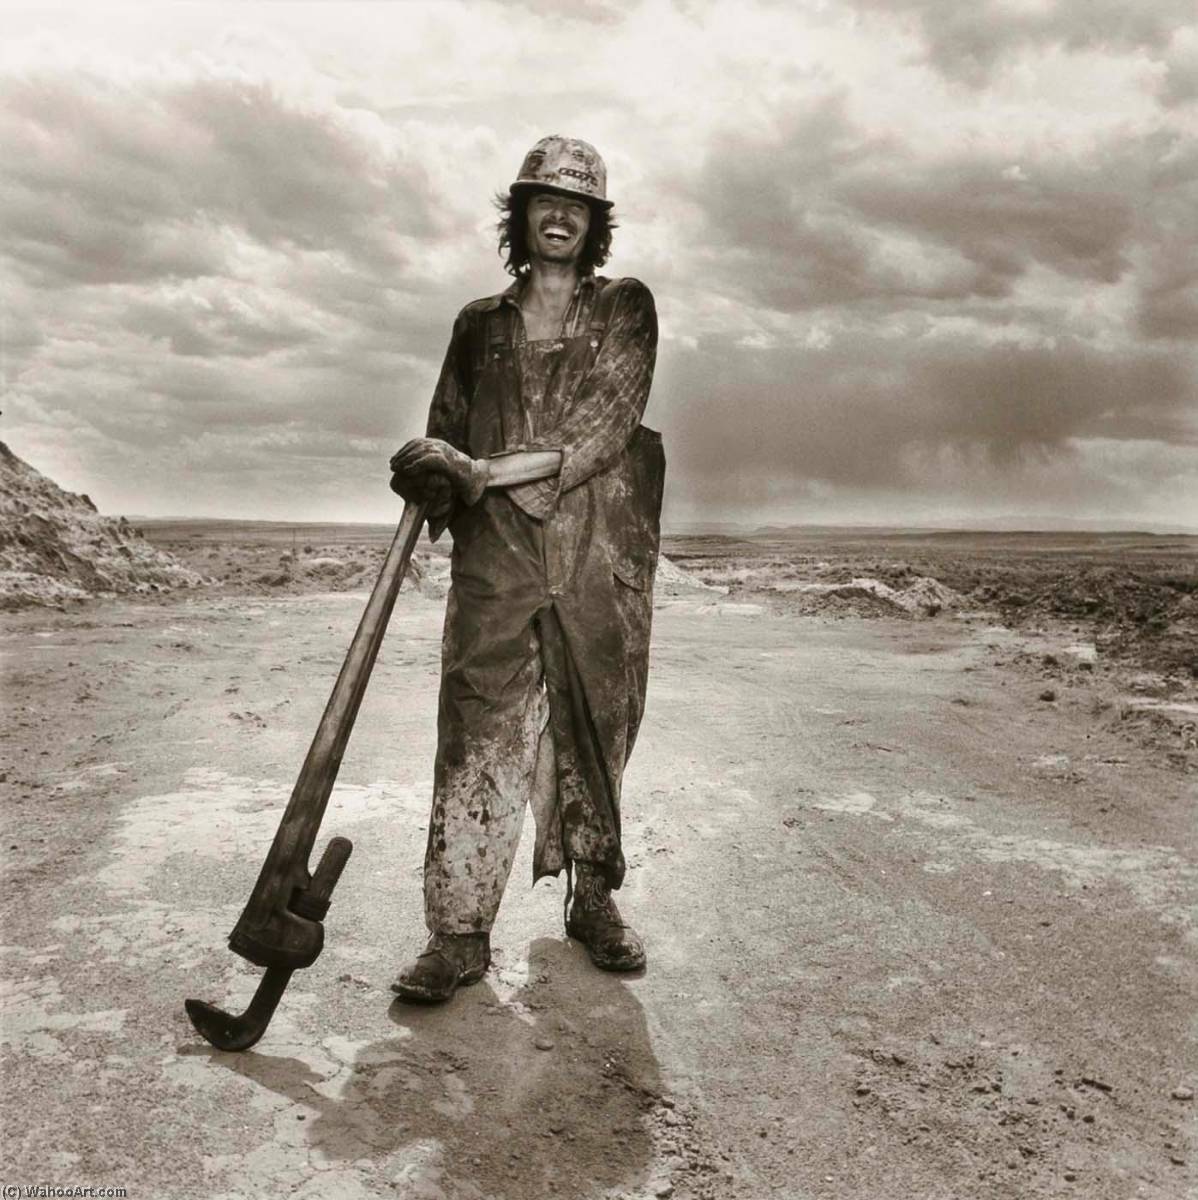 Oil Field Roughneck, from the Wyoming Documentary Survey Project, 1979 by Penny Diane Wolin Penny Diane Wolin | ArtsDot.com